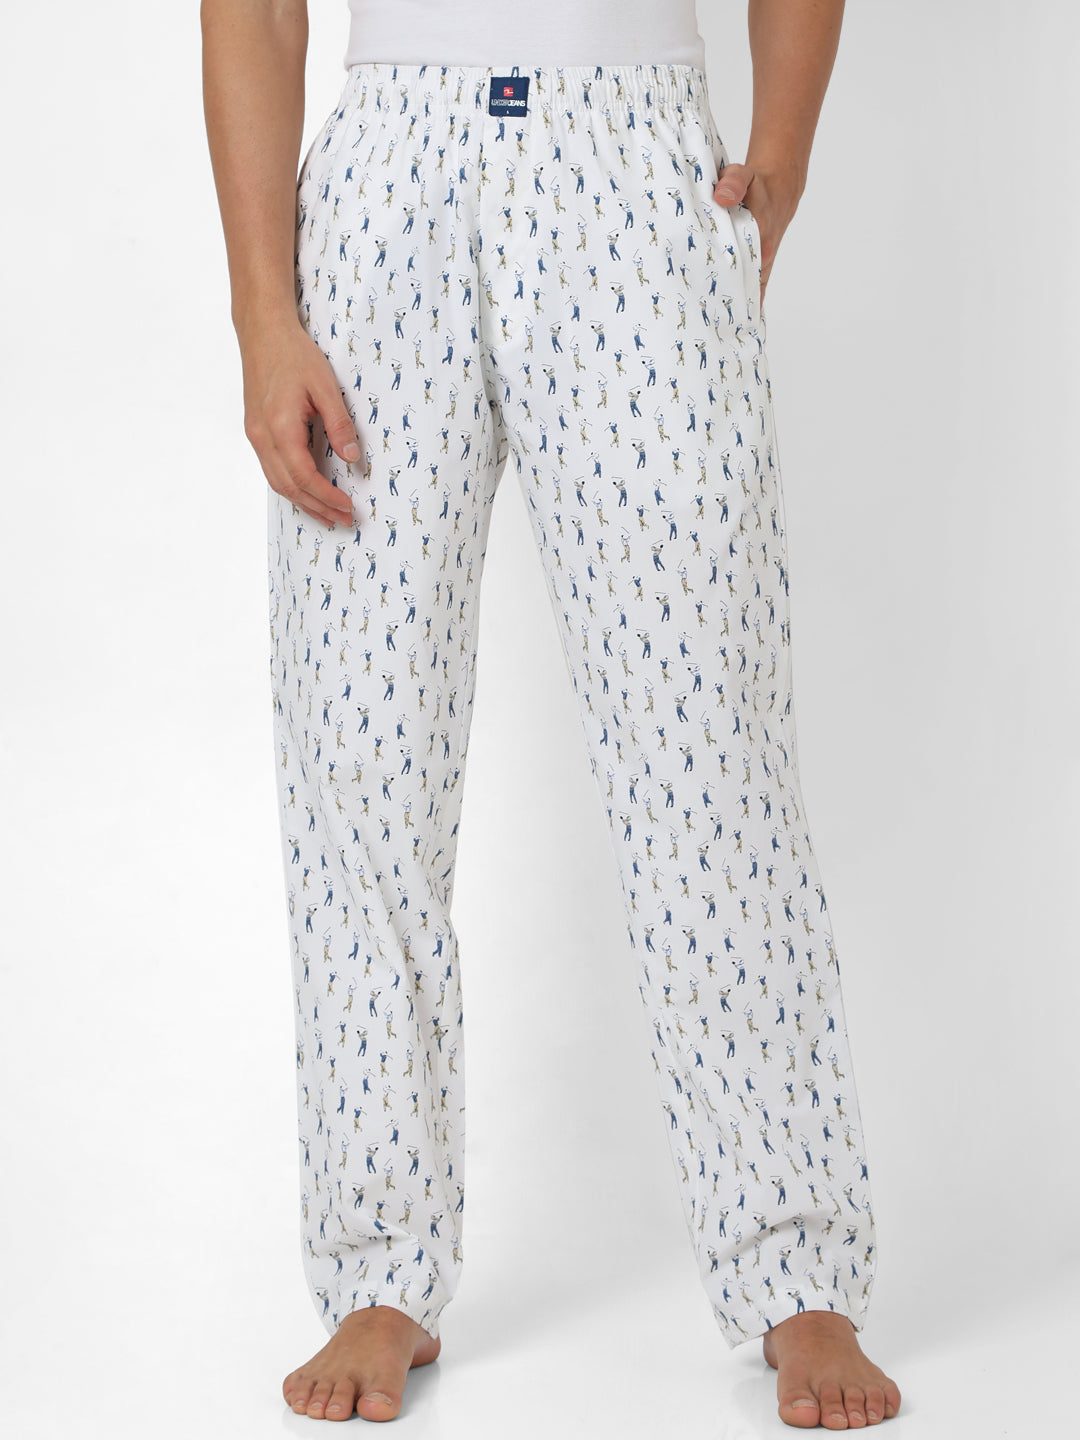 Blueberry Linen Pajama Pants | Piglet in Bed US